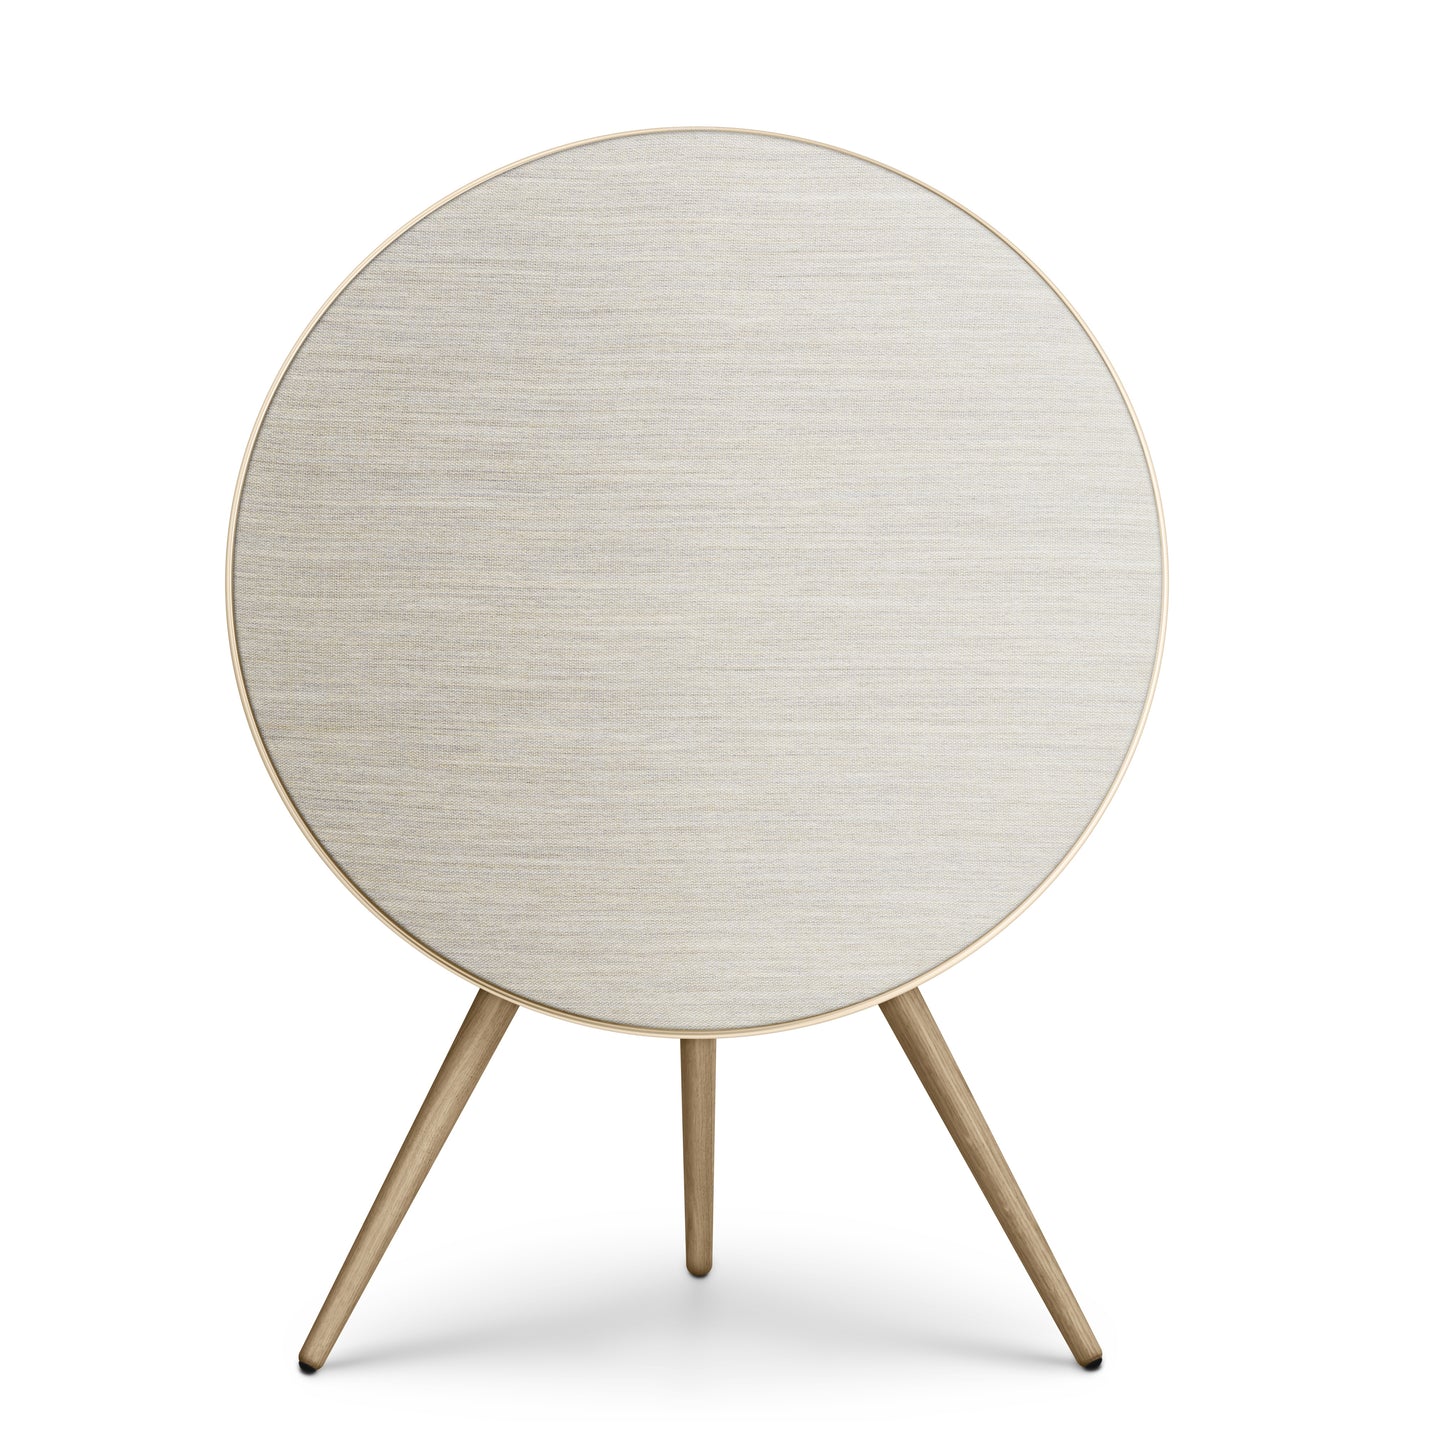 Bang & olufsen BeoPLay A9 Gold Tone